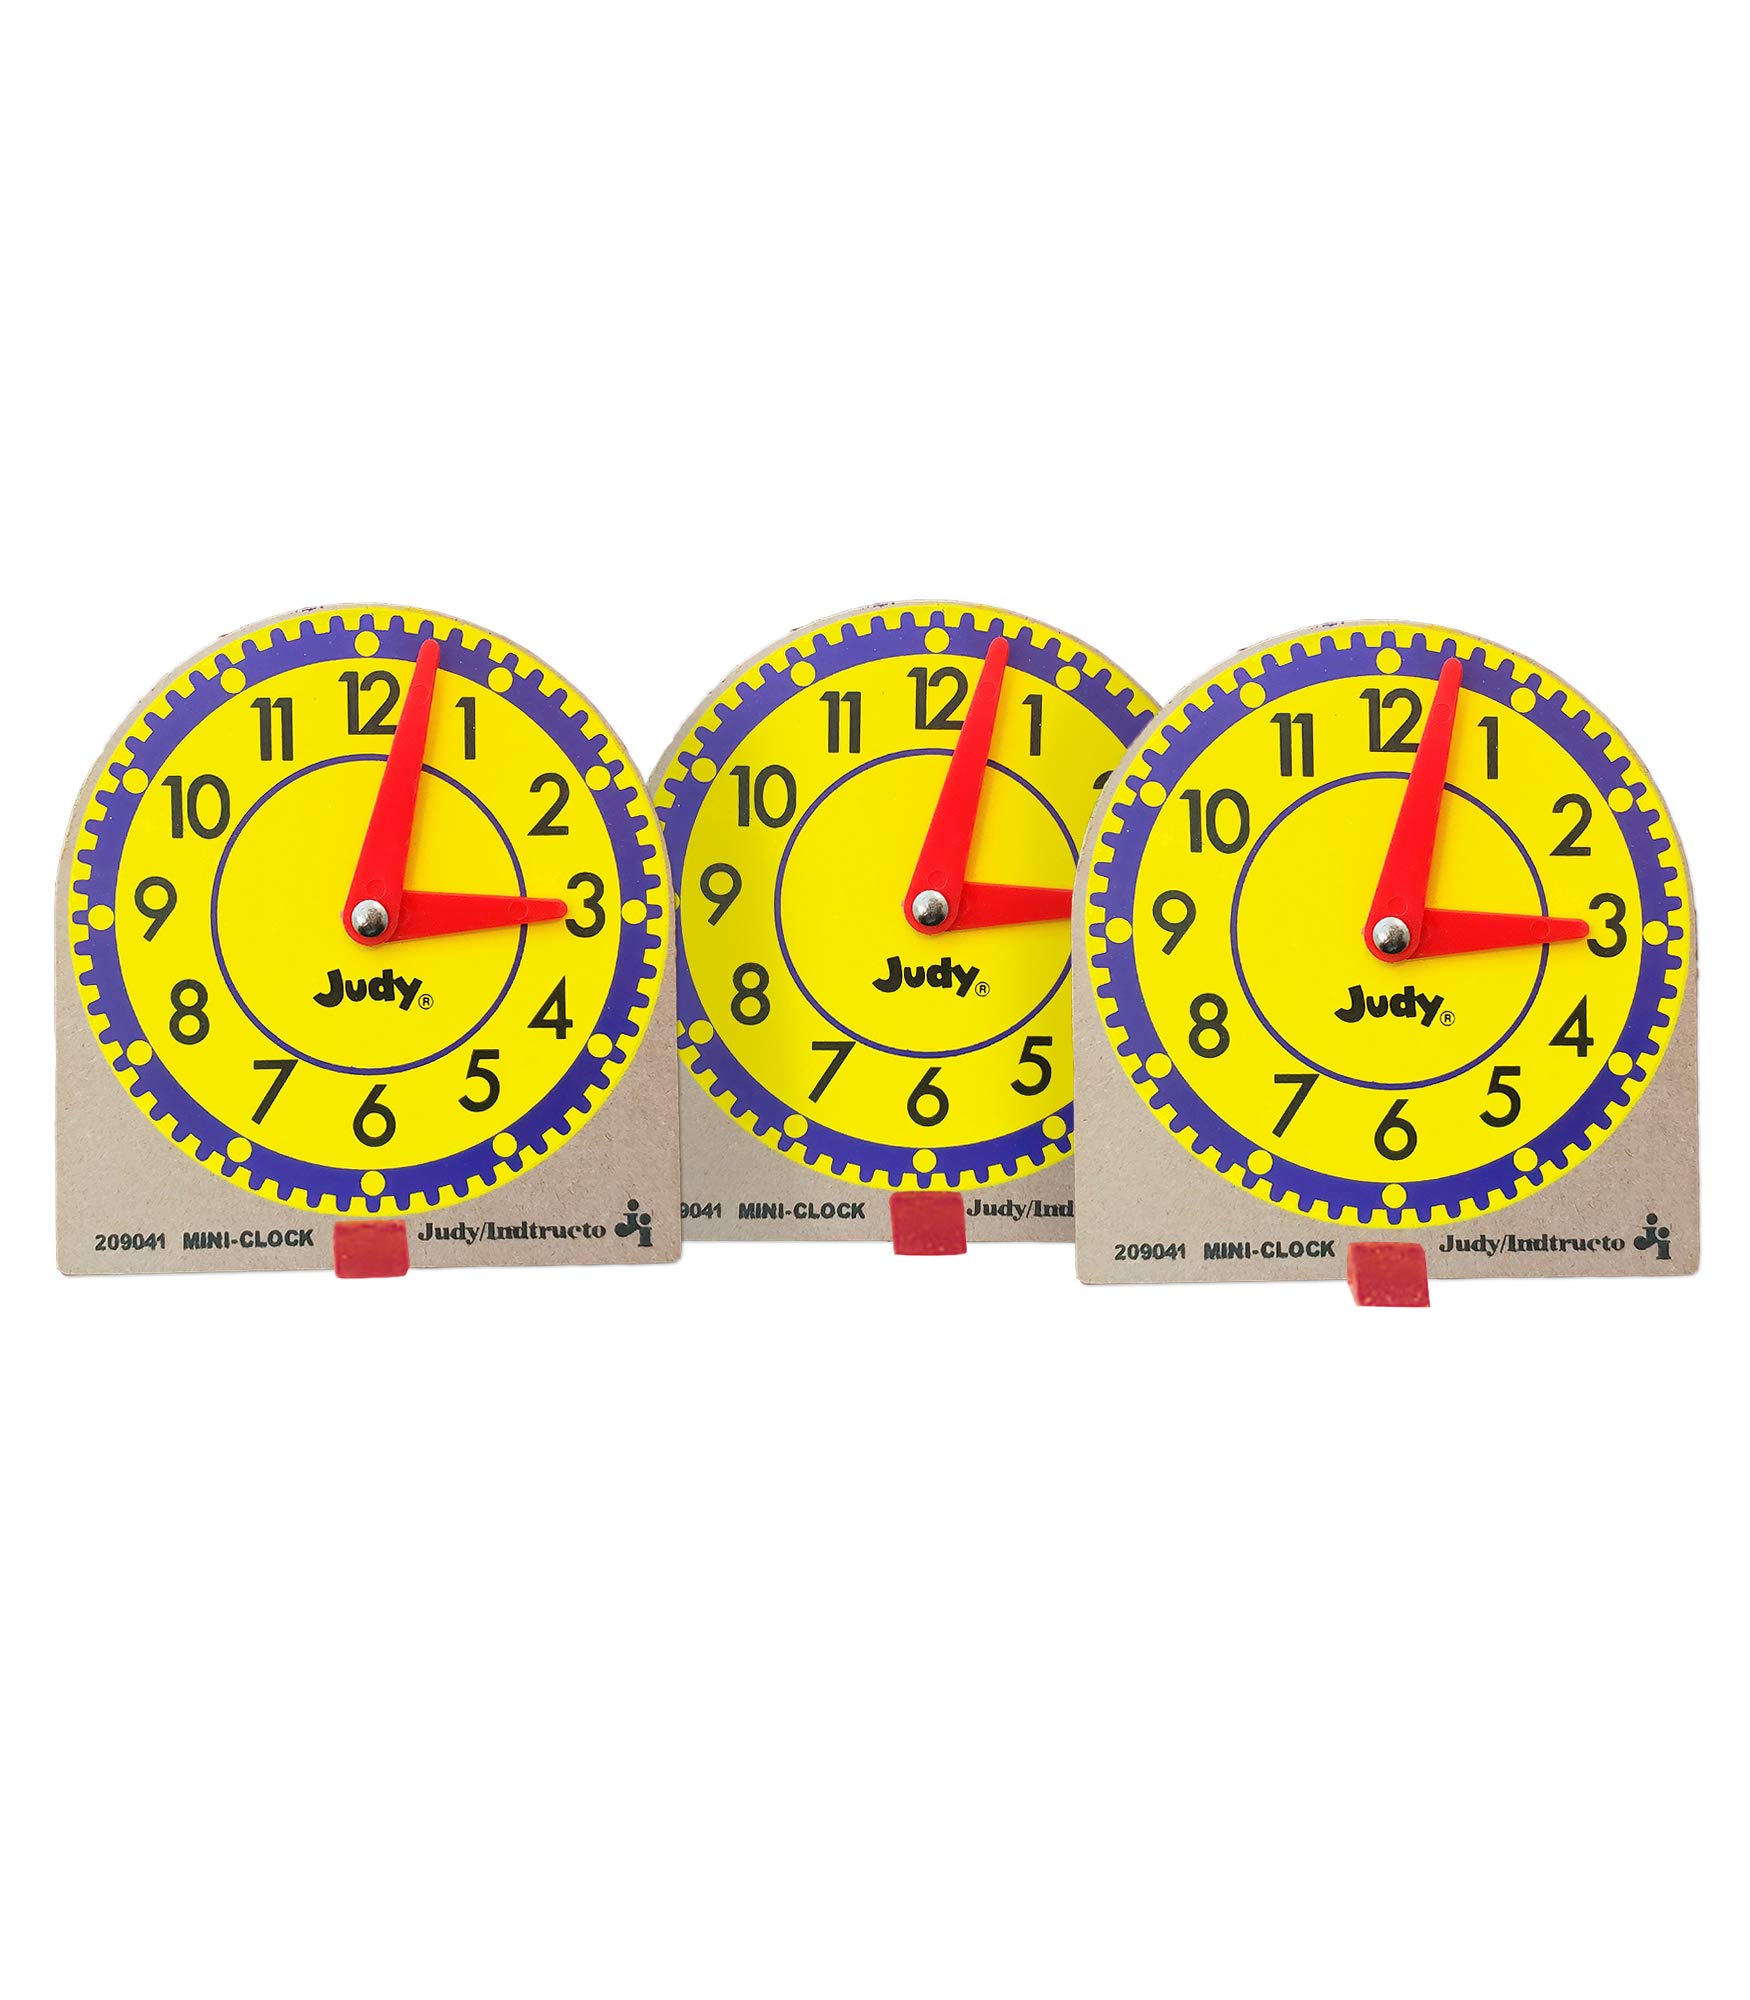 Carson Dellosa Mini Judy Clock Set— Grades K-3 Math Manipulatives for Telling Time, Colorful Wooden Mini Clocks With Movable Hour and Minute Hands, 4